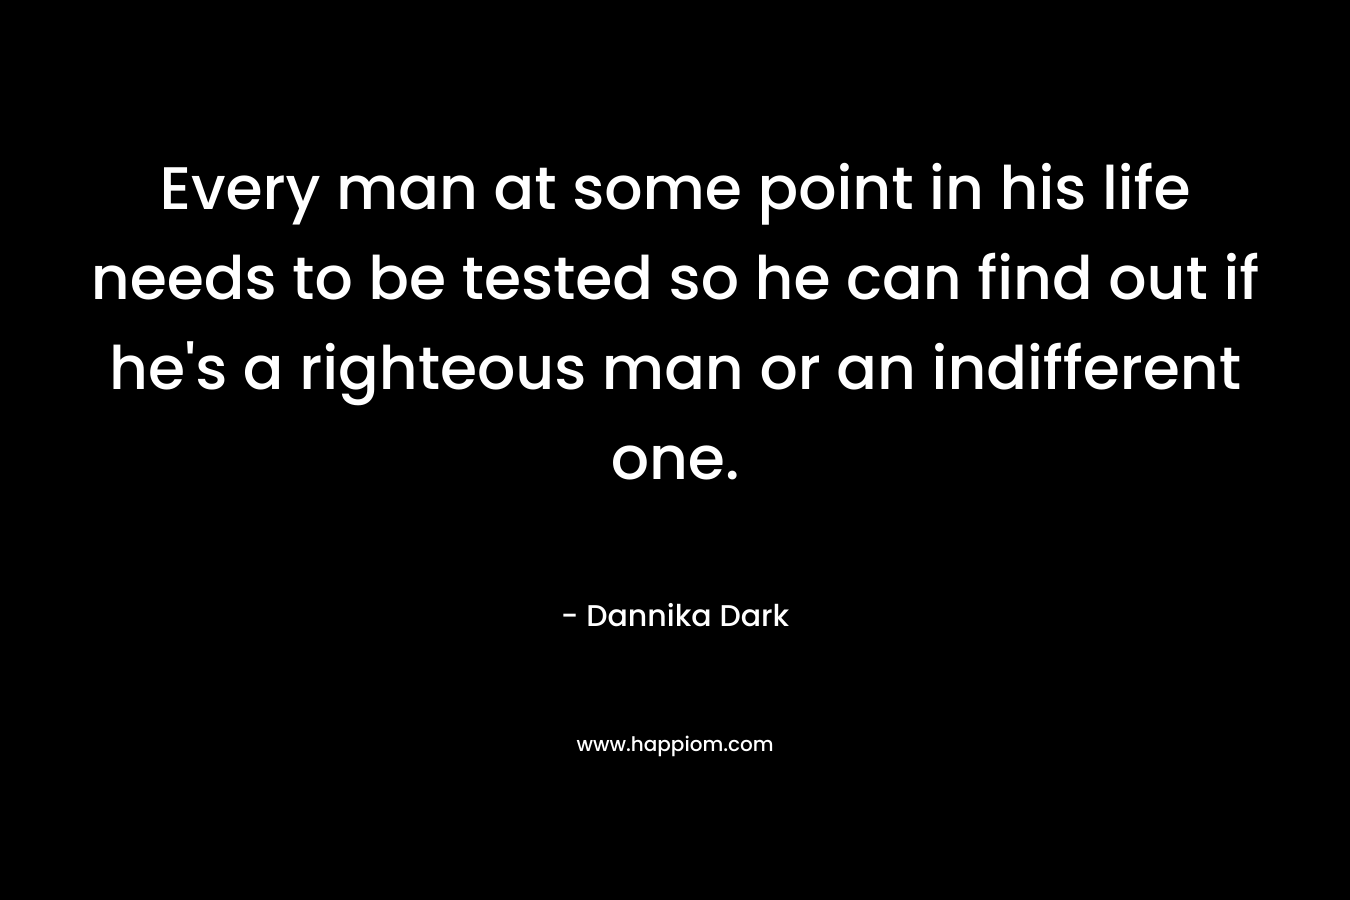 Every man at some point in his life needs to be tested so he can find out if he's a righteous man or an indifferent one.